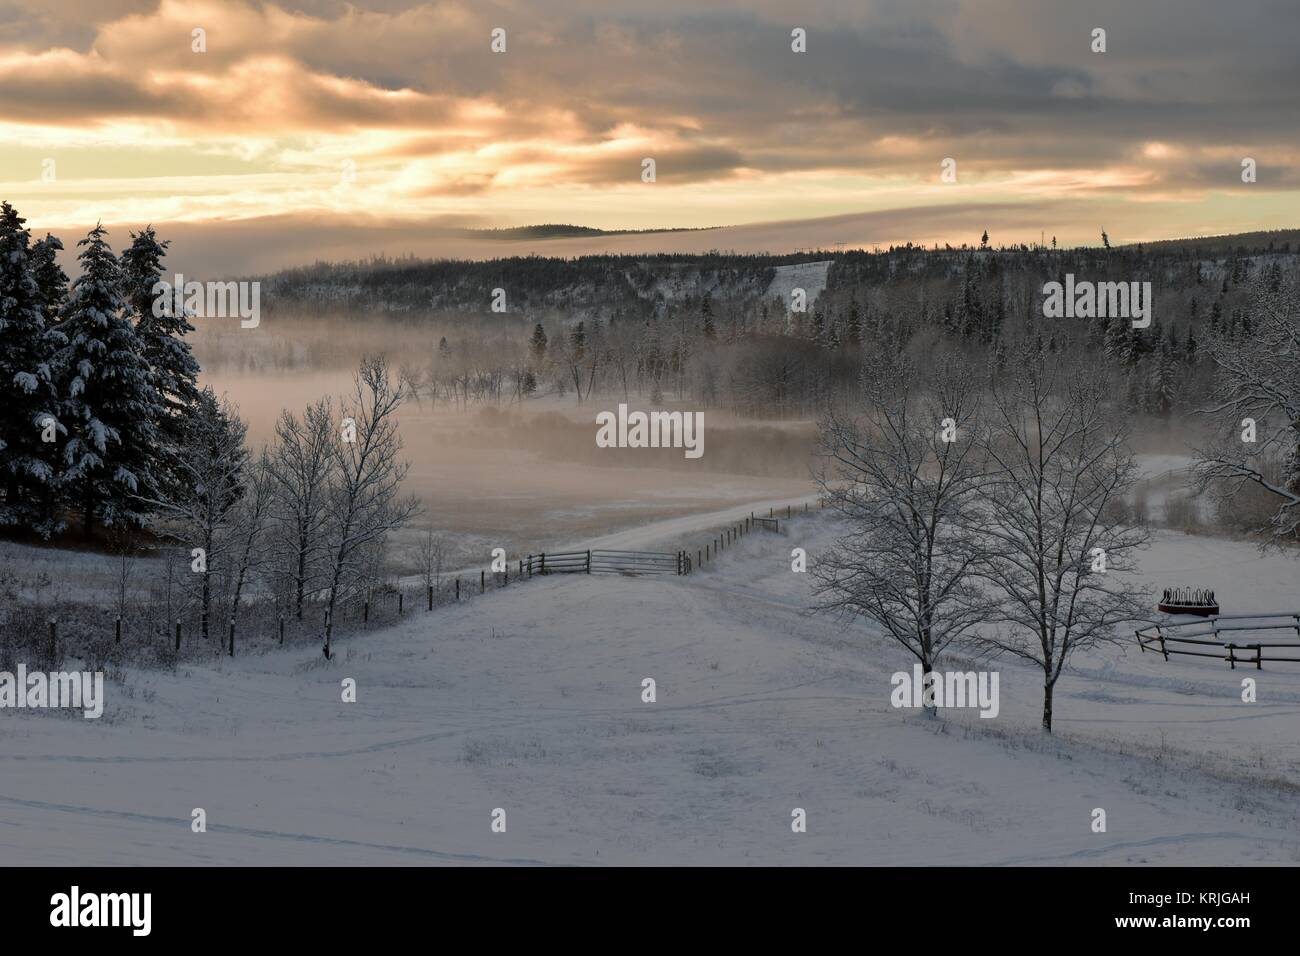 Beautiful sunrise on a foggy, misty winter morning. Taken on December 18, 2017 at 9:45 A.M. Stock Photo